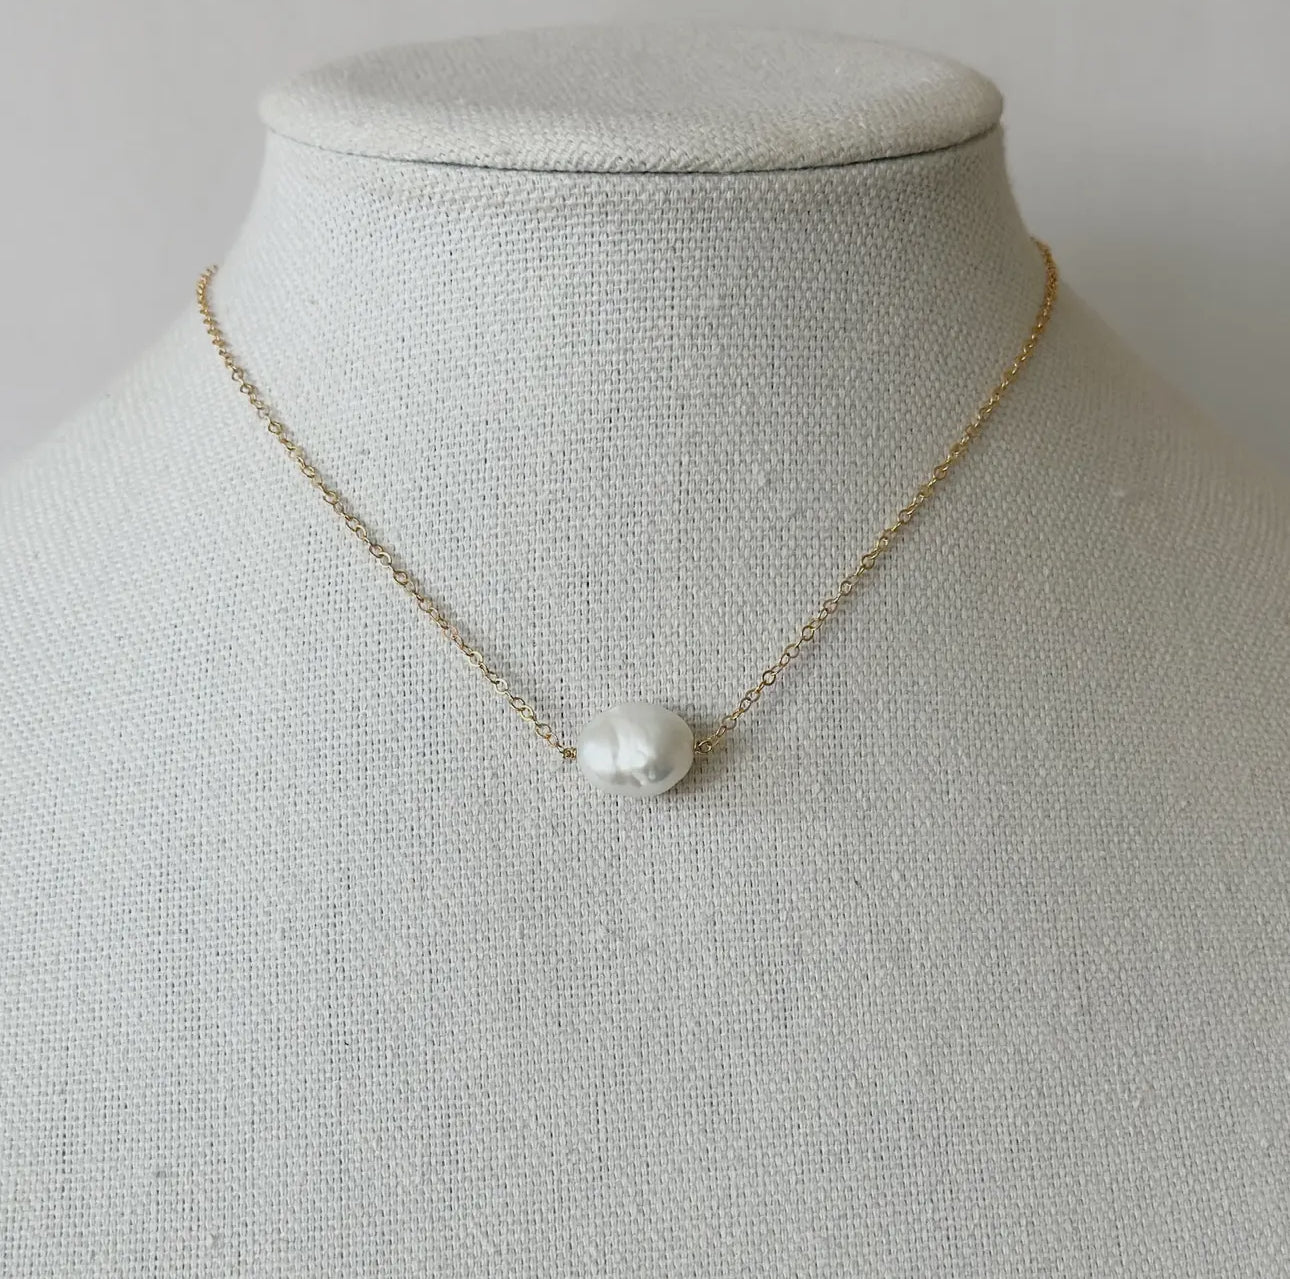 Ollie Pearl Necklace - Wired Baroque Pearl